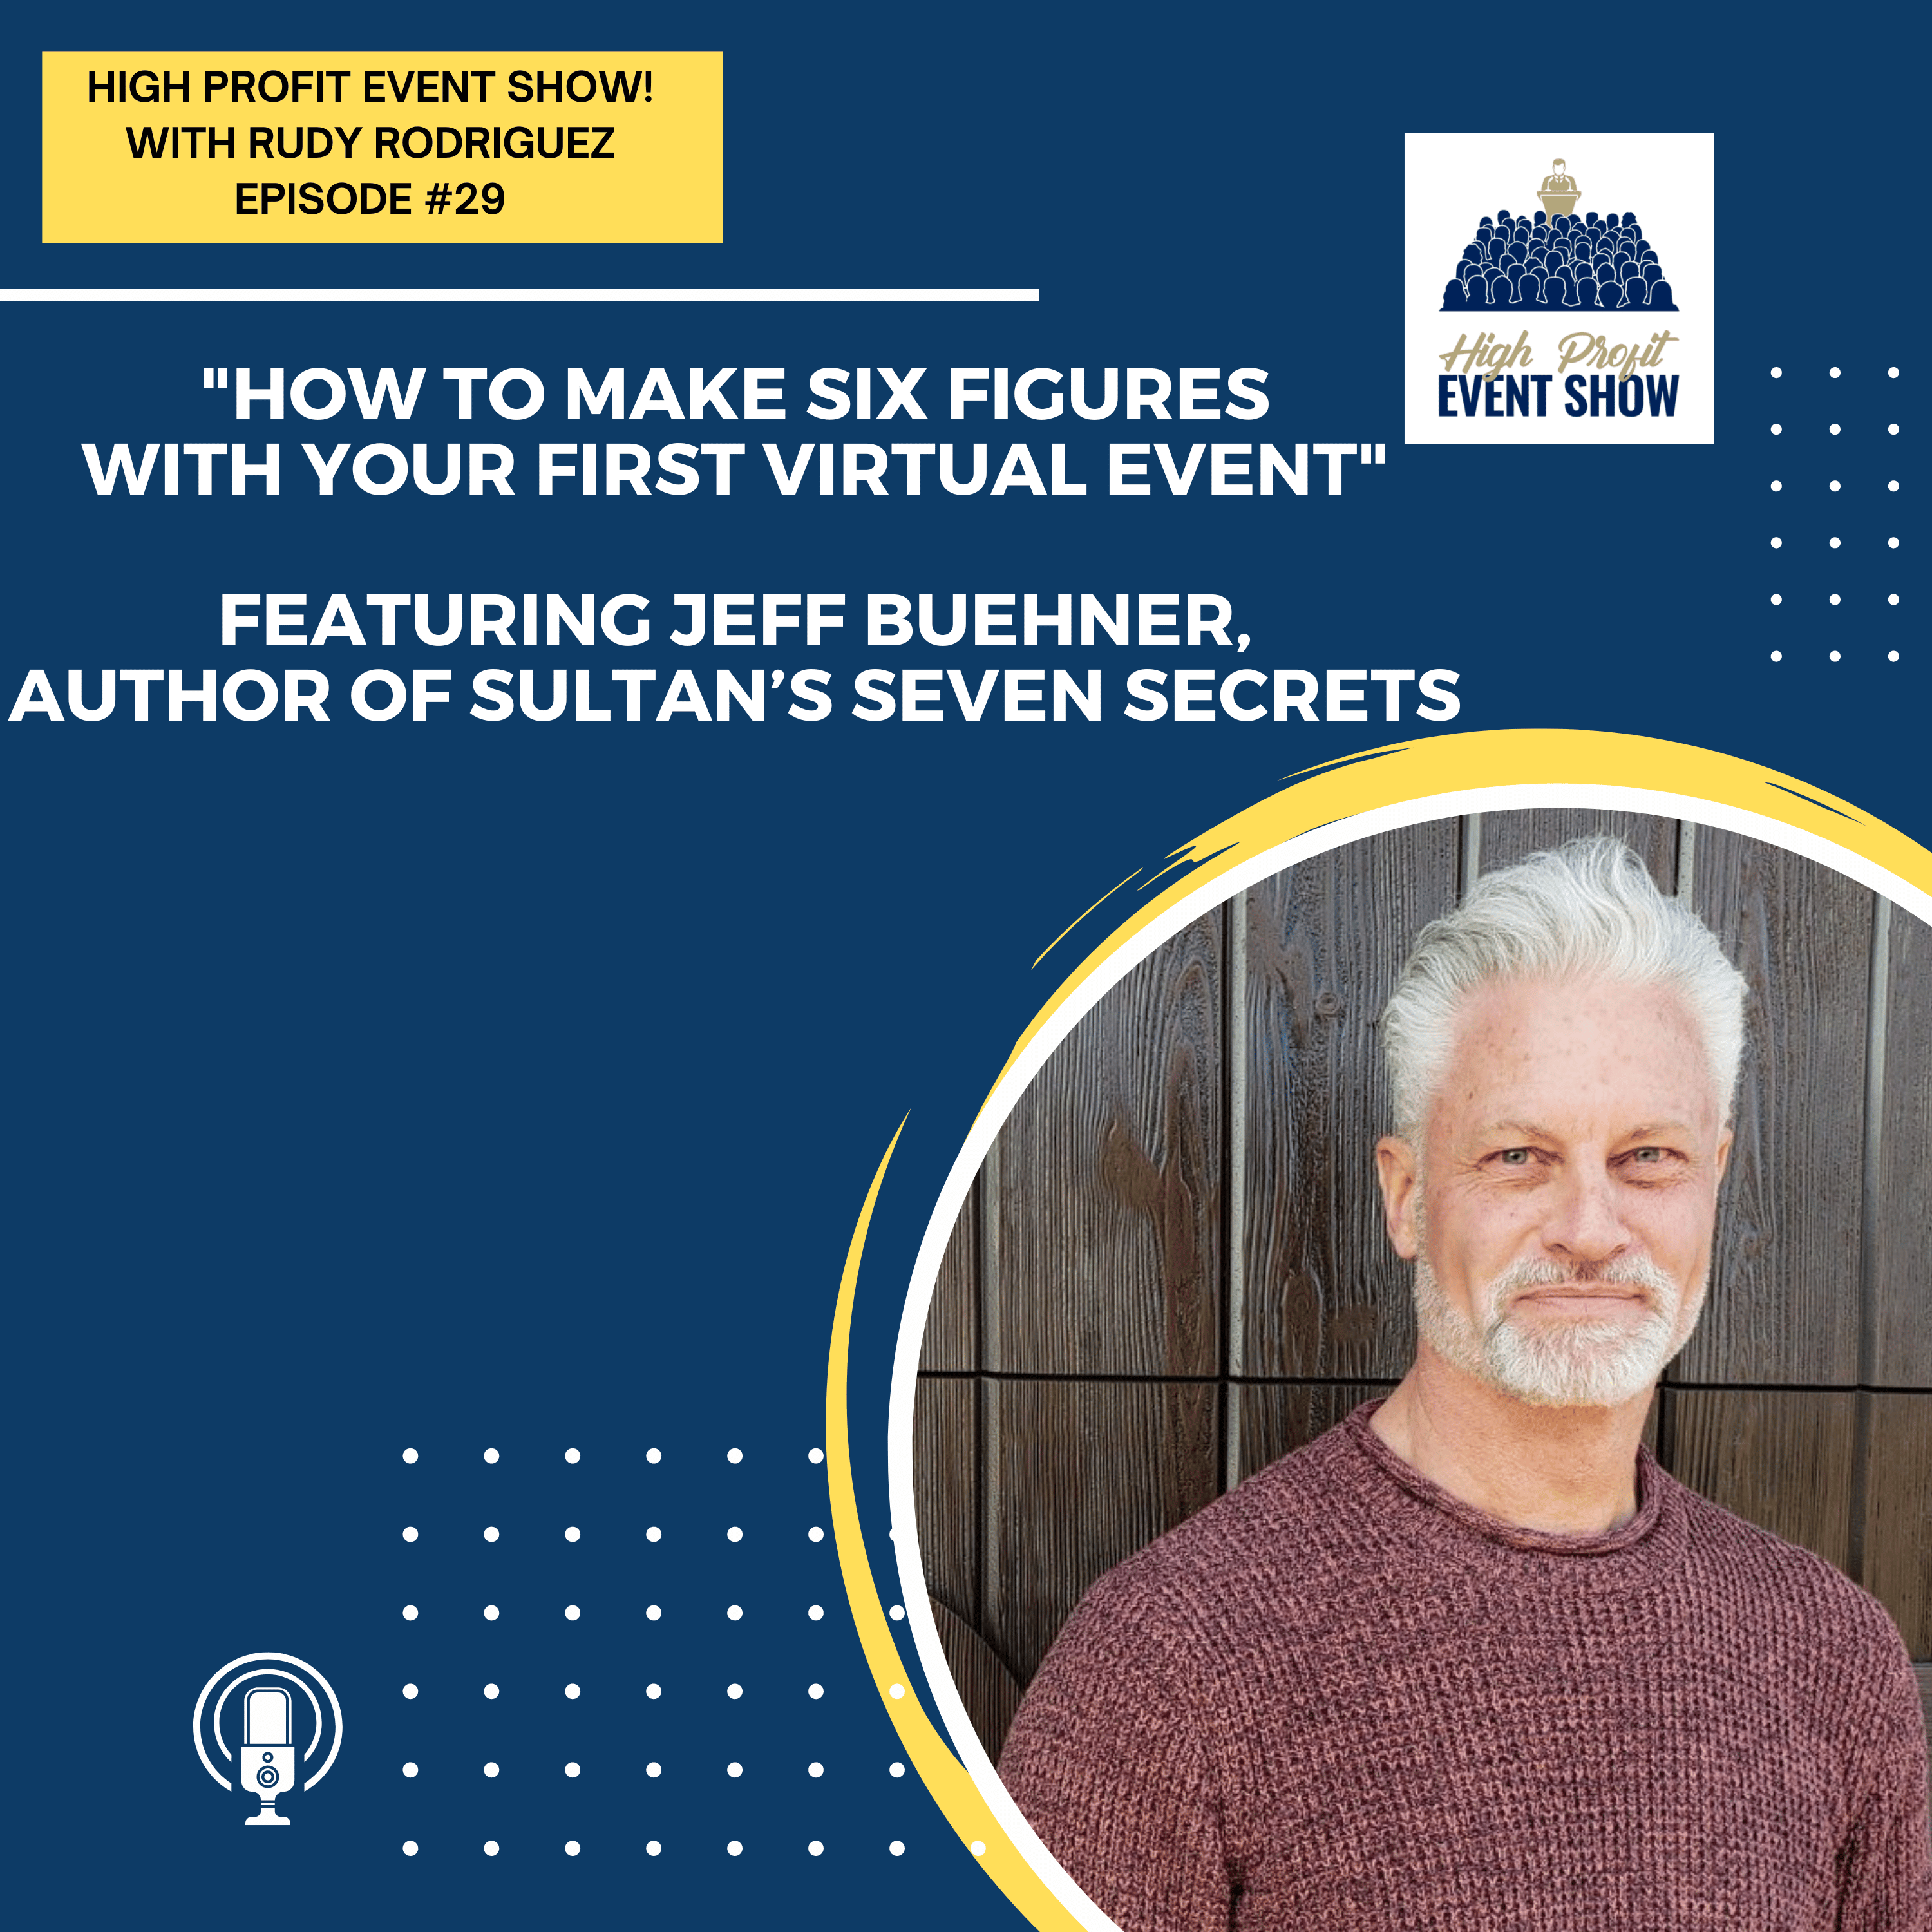 Episode 29: How to Make Six Figures with Your First Virtual Event with Jeff Buehner!